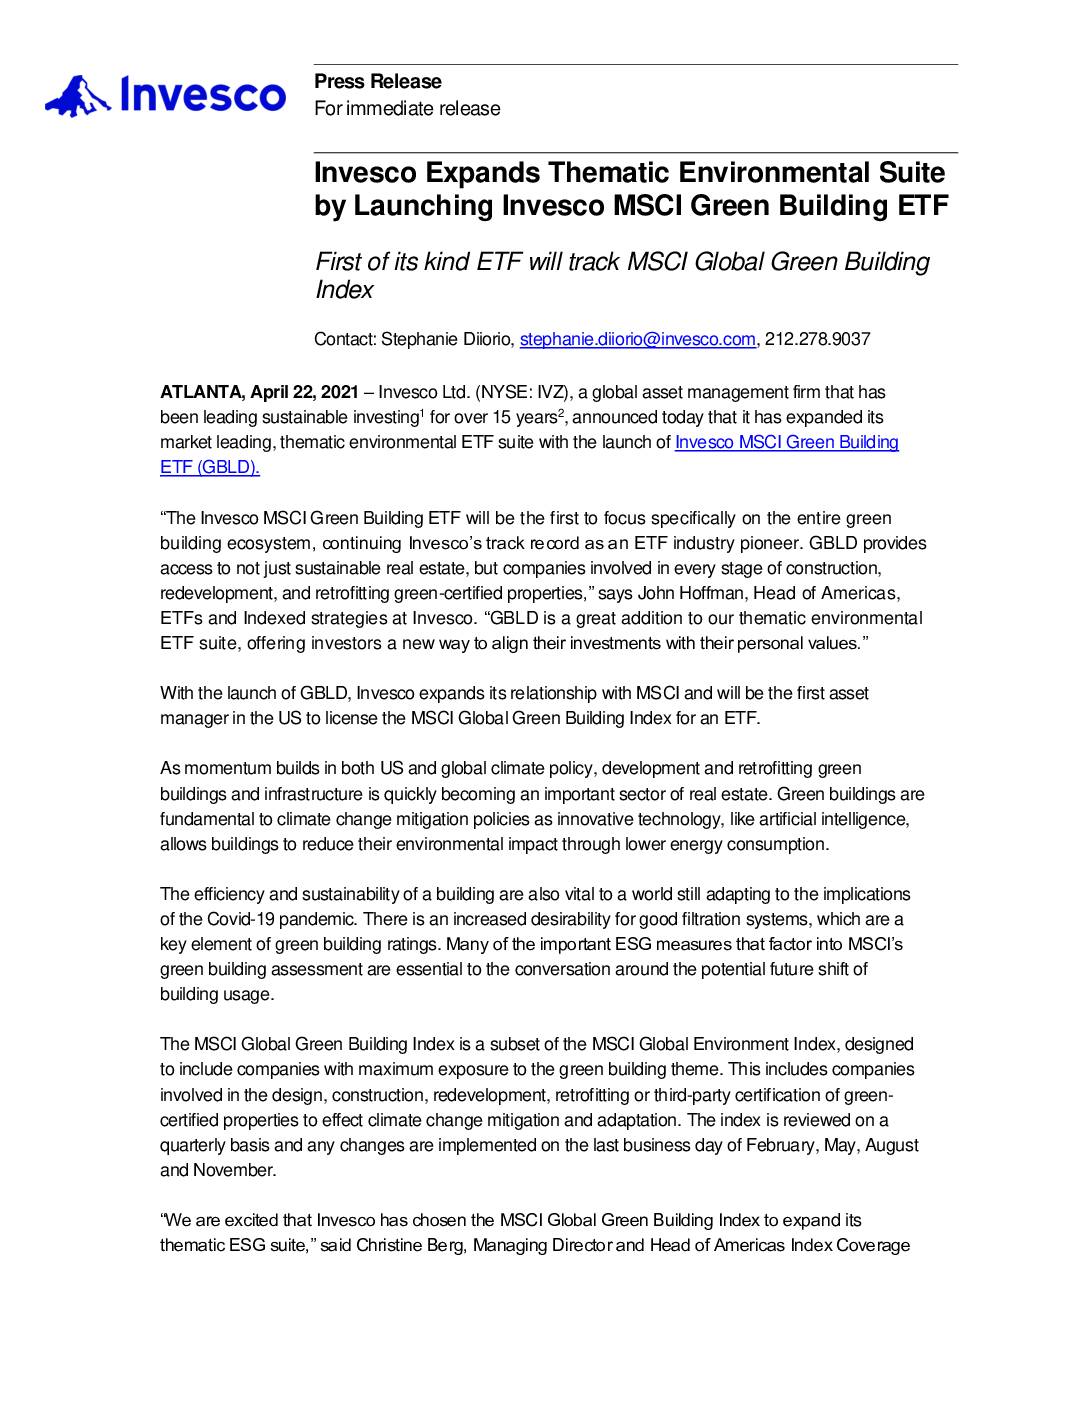 Invesco Expands Thematic Environmental Suite by Launching Invesco MSCI Green Building ETF